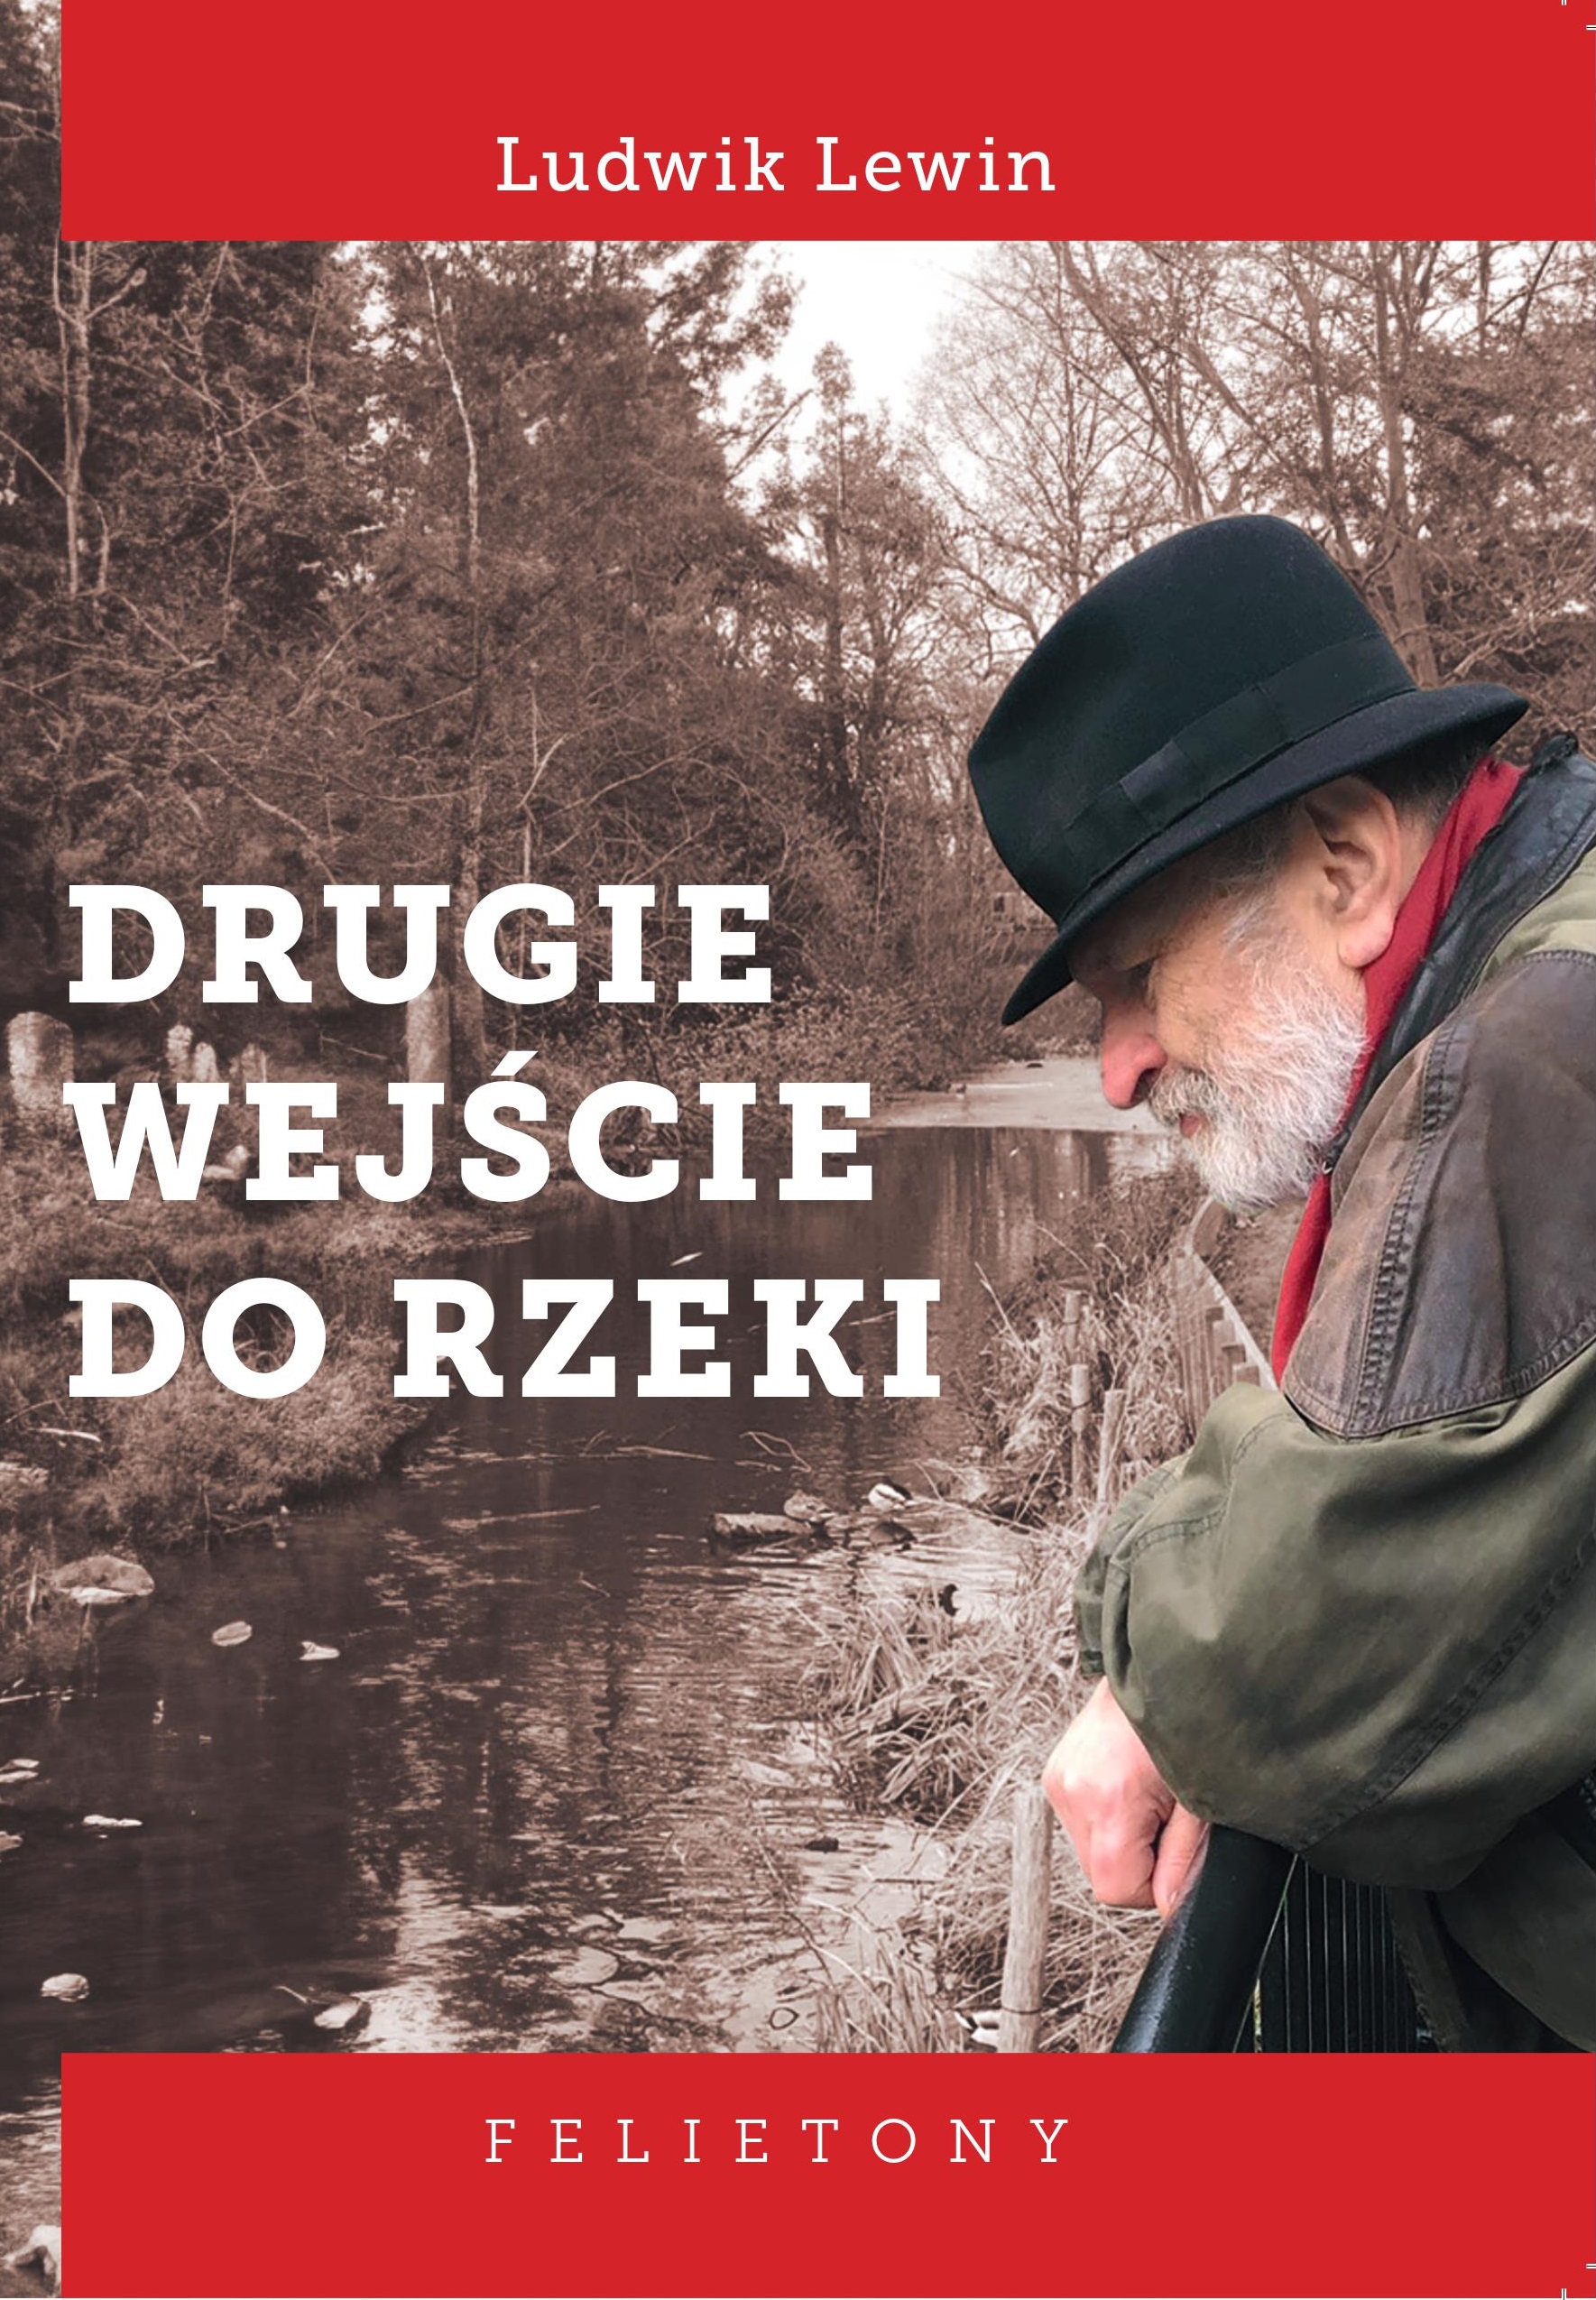 Drugie wejście do rzeki [The Second Stepping into the River] – a collection of articles by Ludwik Lewin